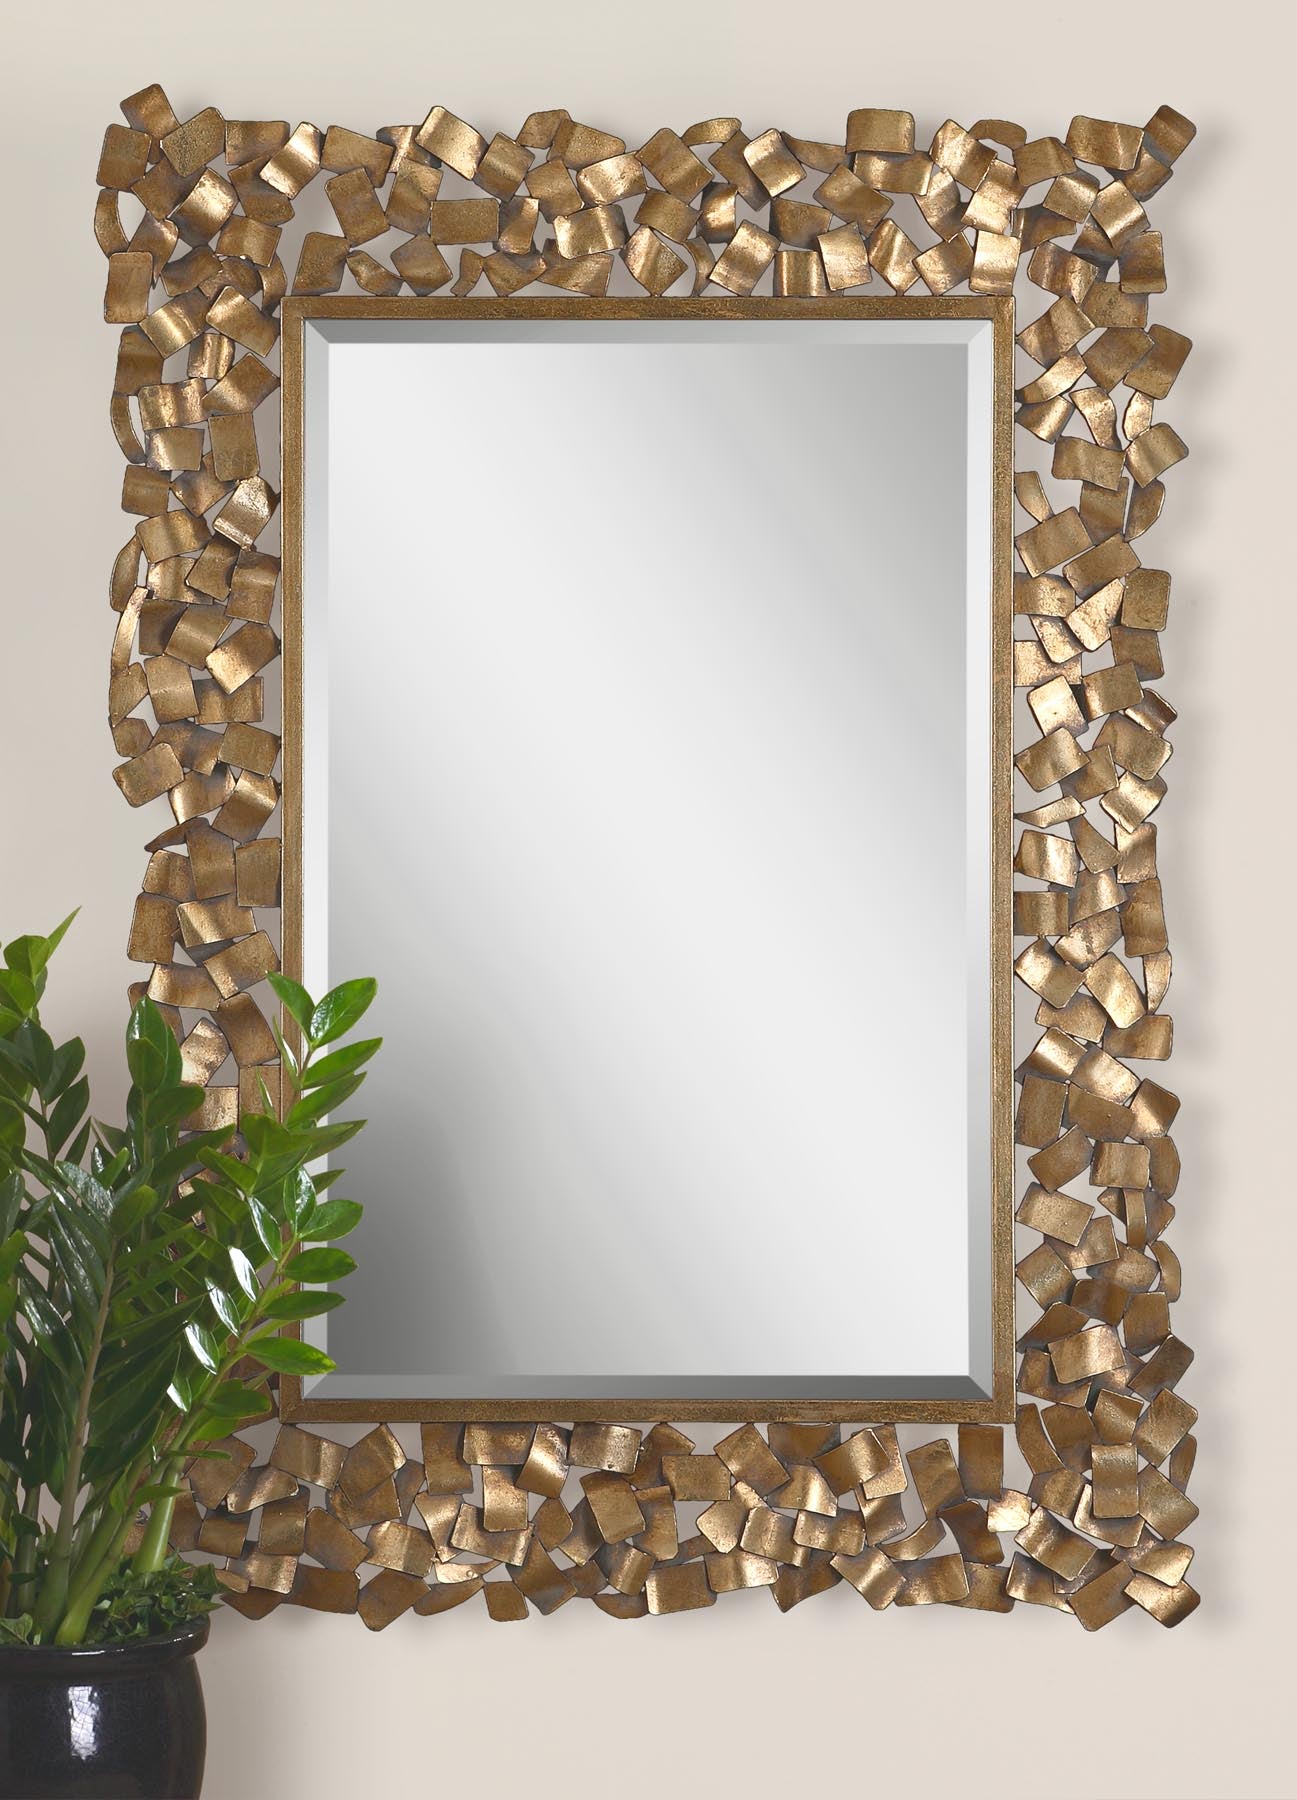 Metal Strips Are Welded Together To Create This Ornate Frame. The Antiqued Gold Leaf Finish Has A Light Gray Glaze. Mirror...